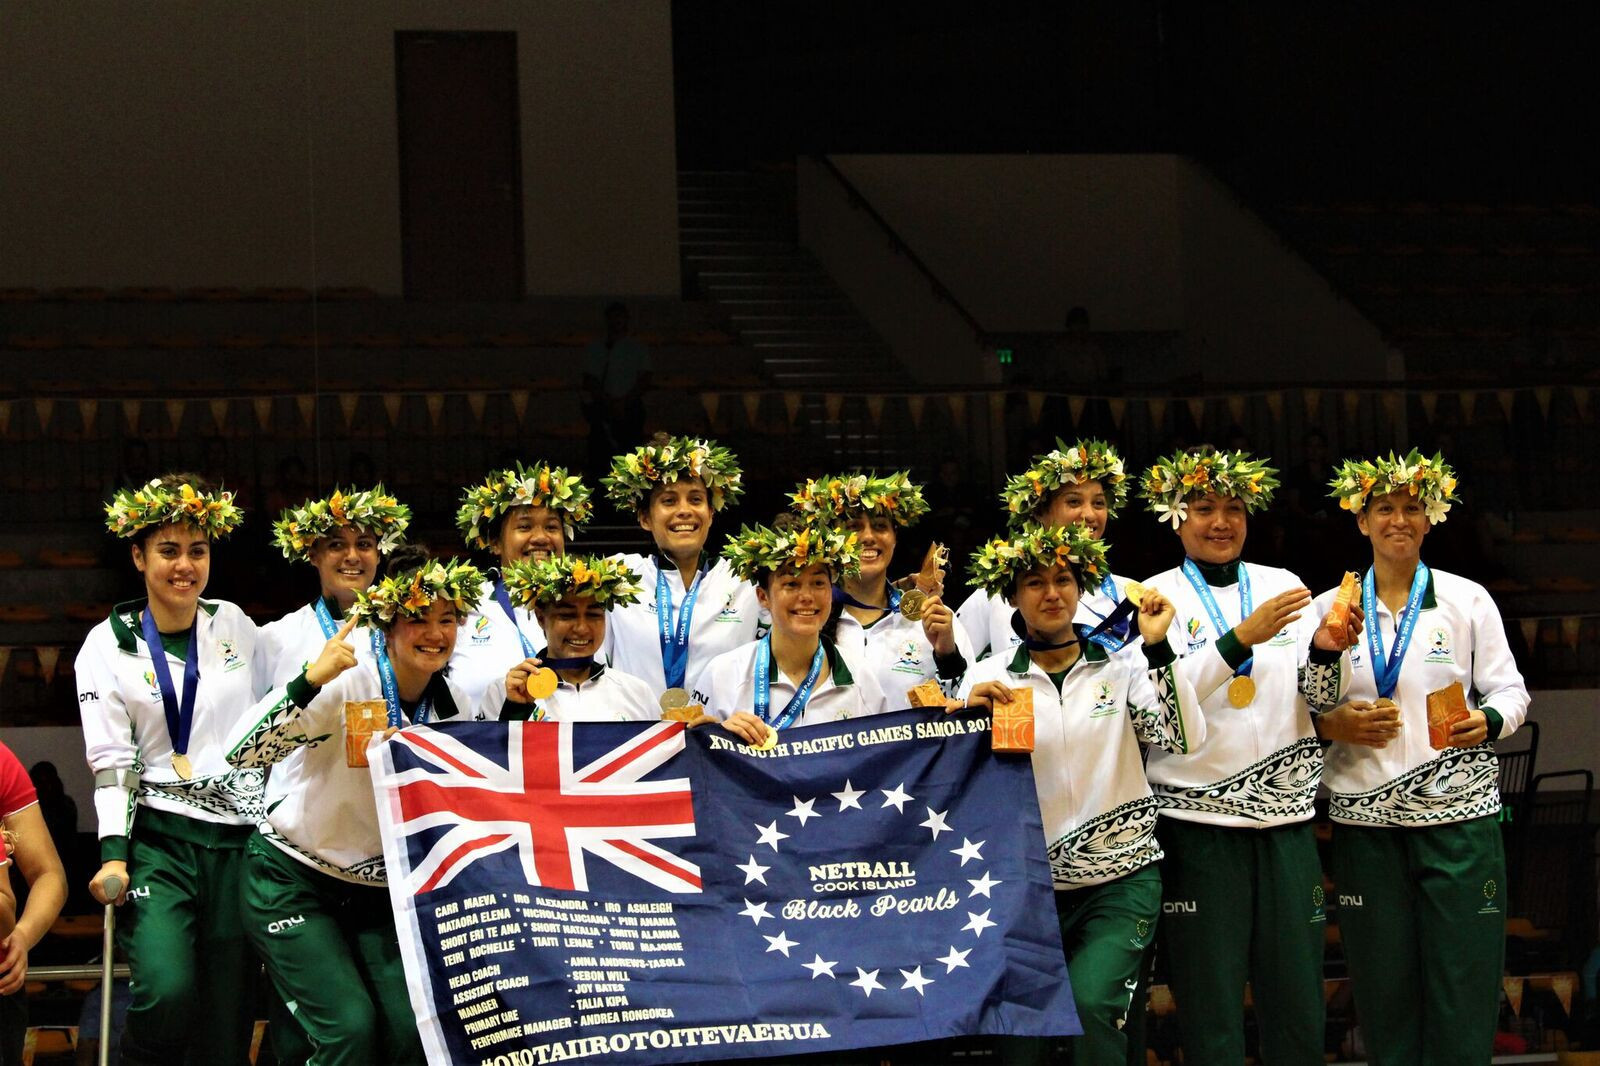 Cook Islands won the Pacific Games netball title for the first time in 28 years after a last second point ©Games News Service